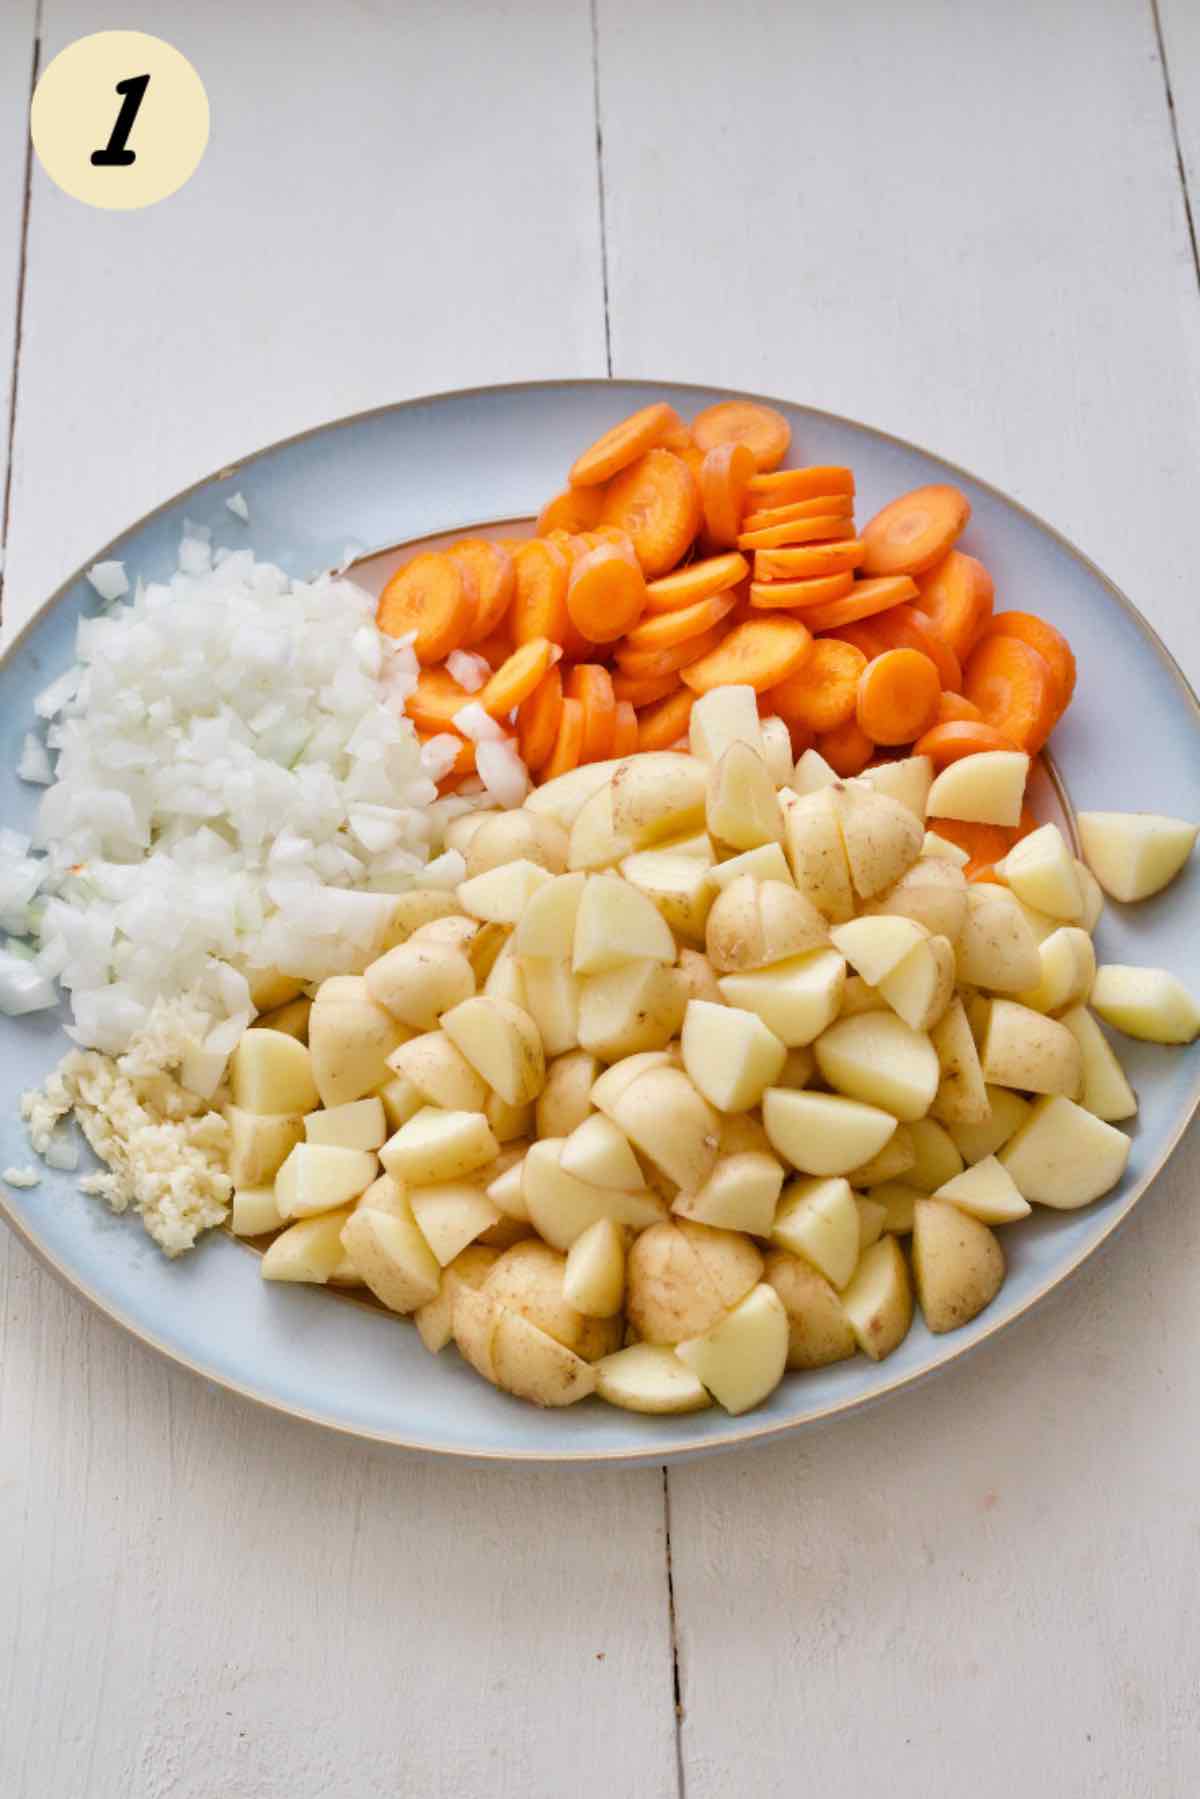 Prepared carrots, potatoes, onion and garlic on a plate.